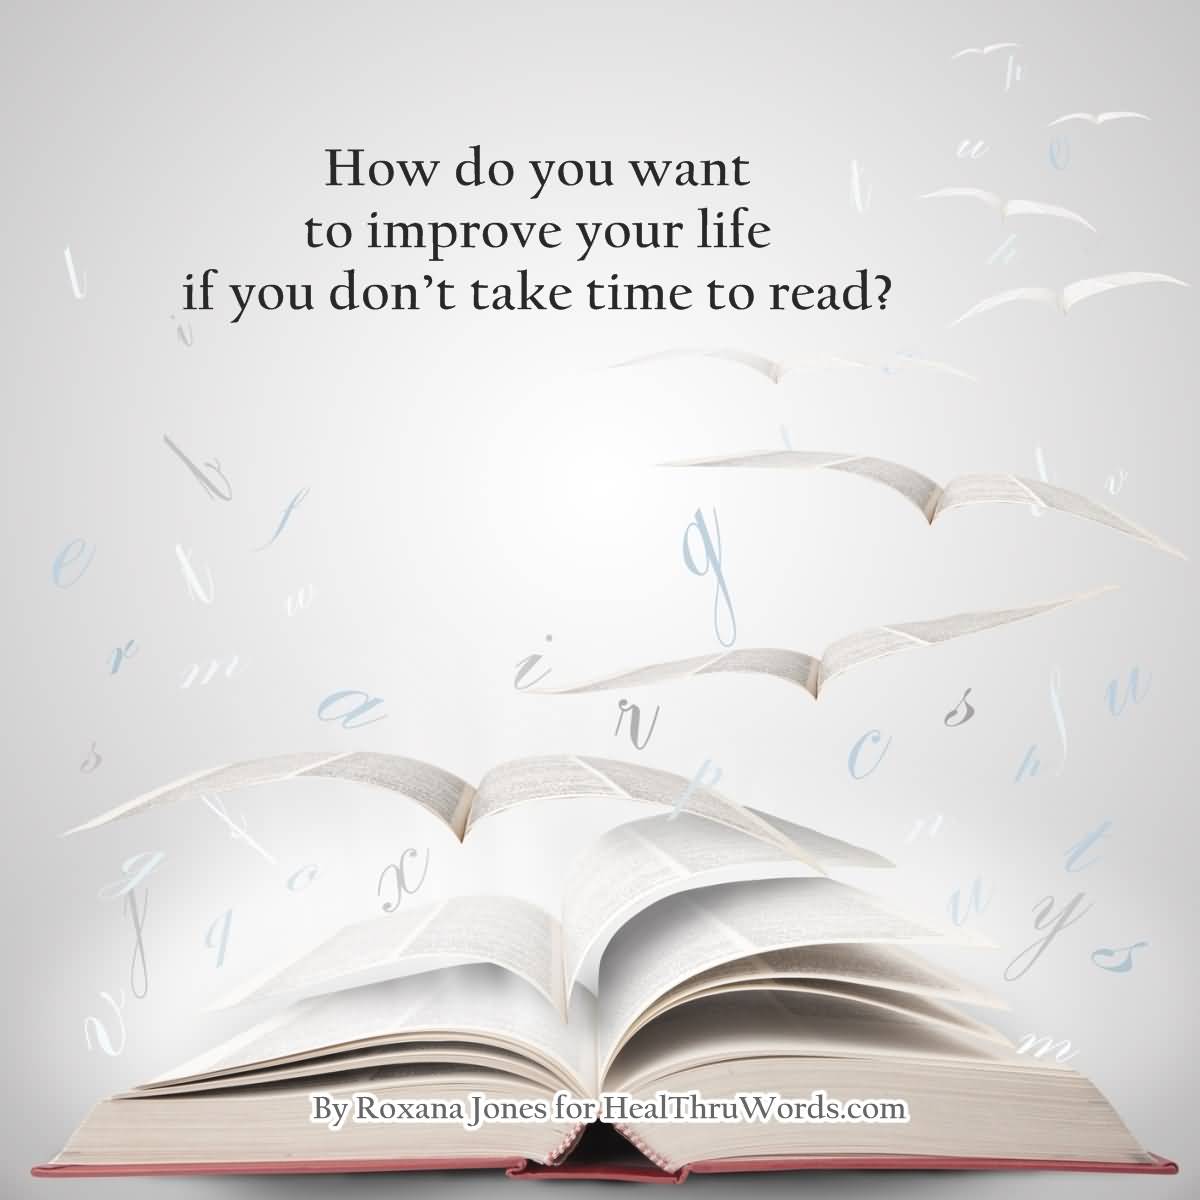 How do you want to improve your life if you don't take time to read1